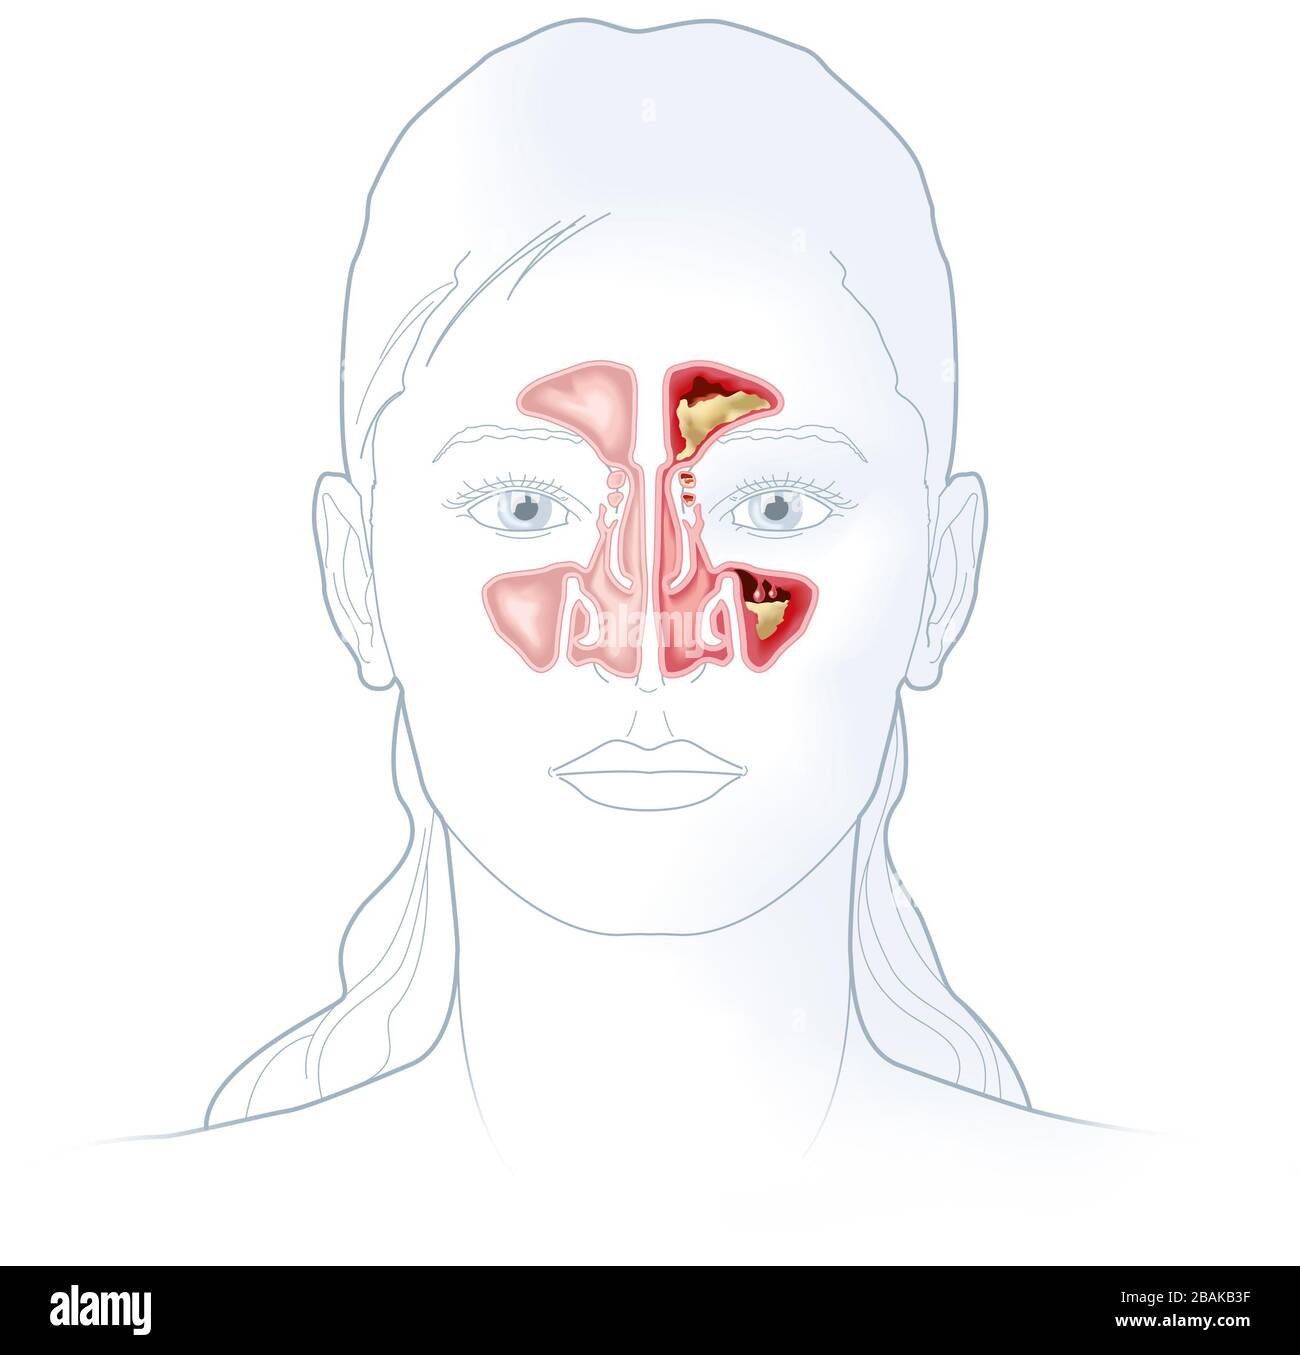 Illustration showing healthy sinus and sinusitis with inflamed lining, obstructed sinus opening, adenoid and excess mucus Stock Photo